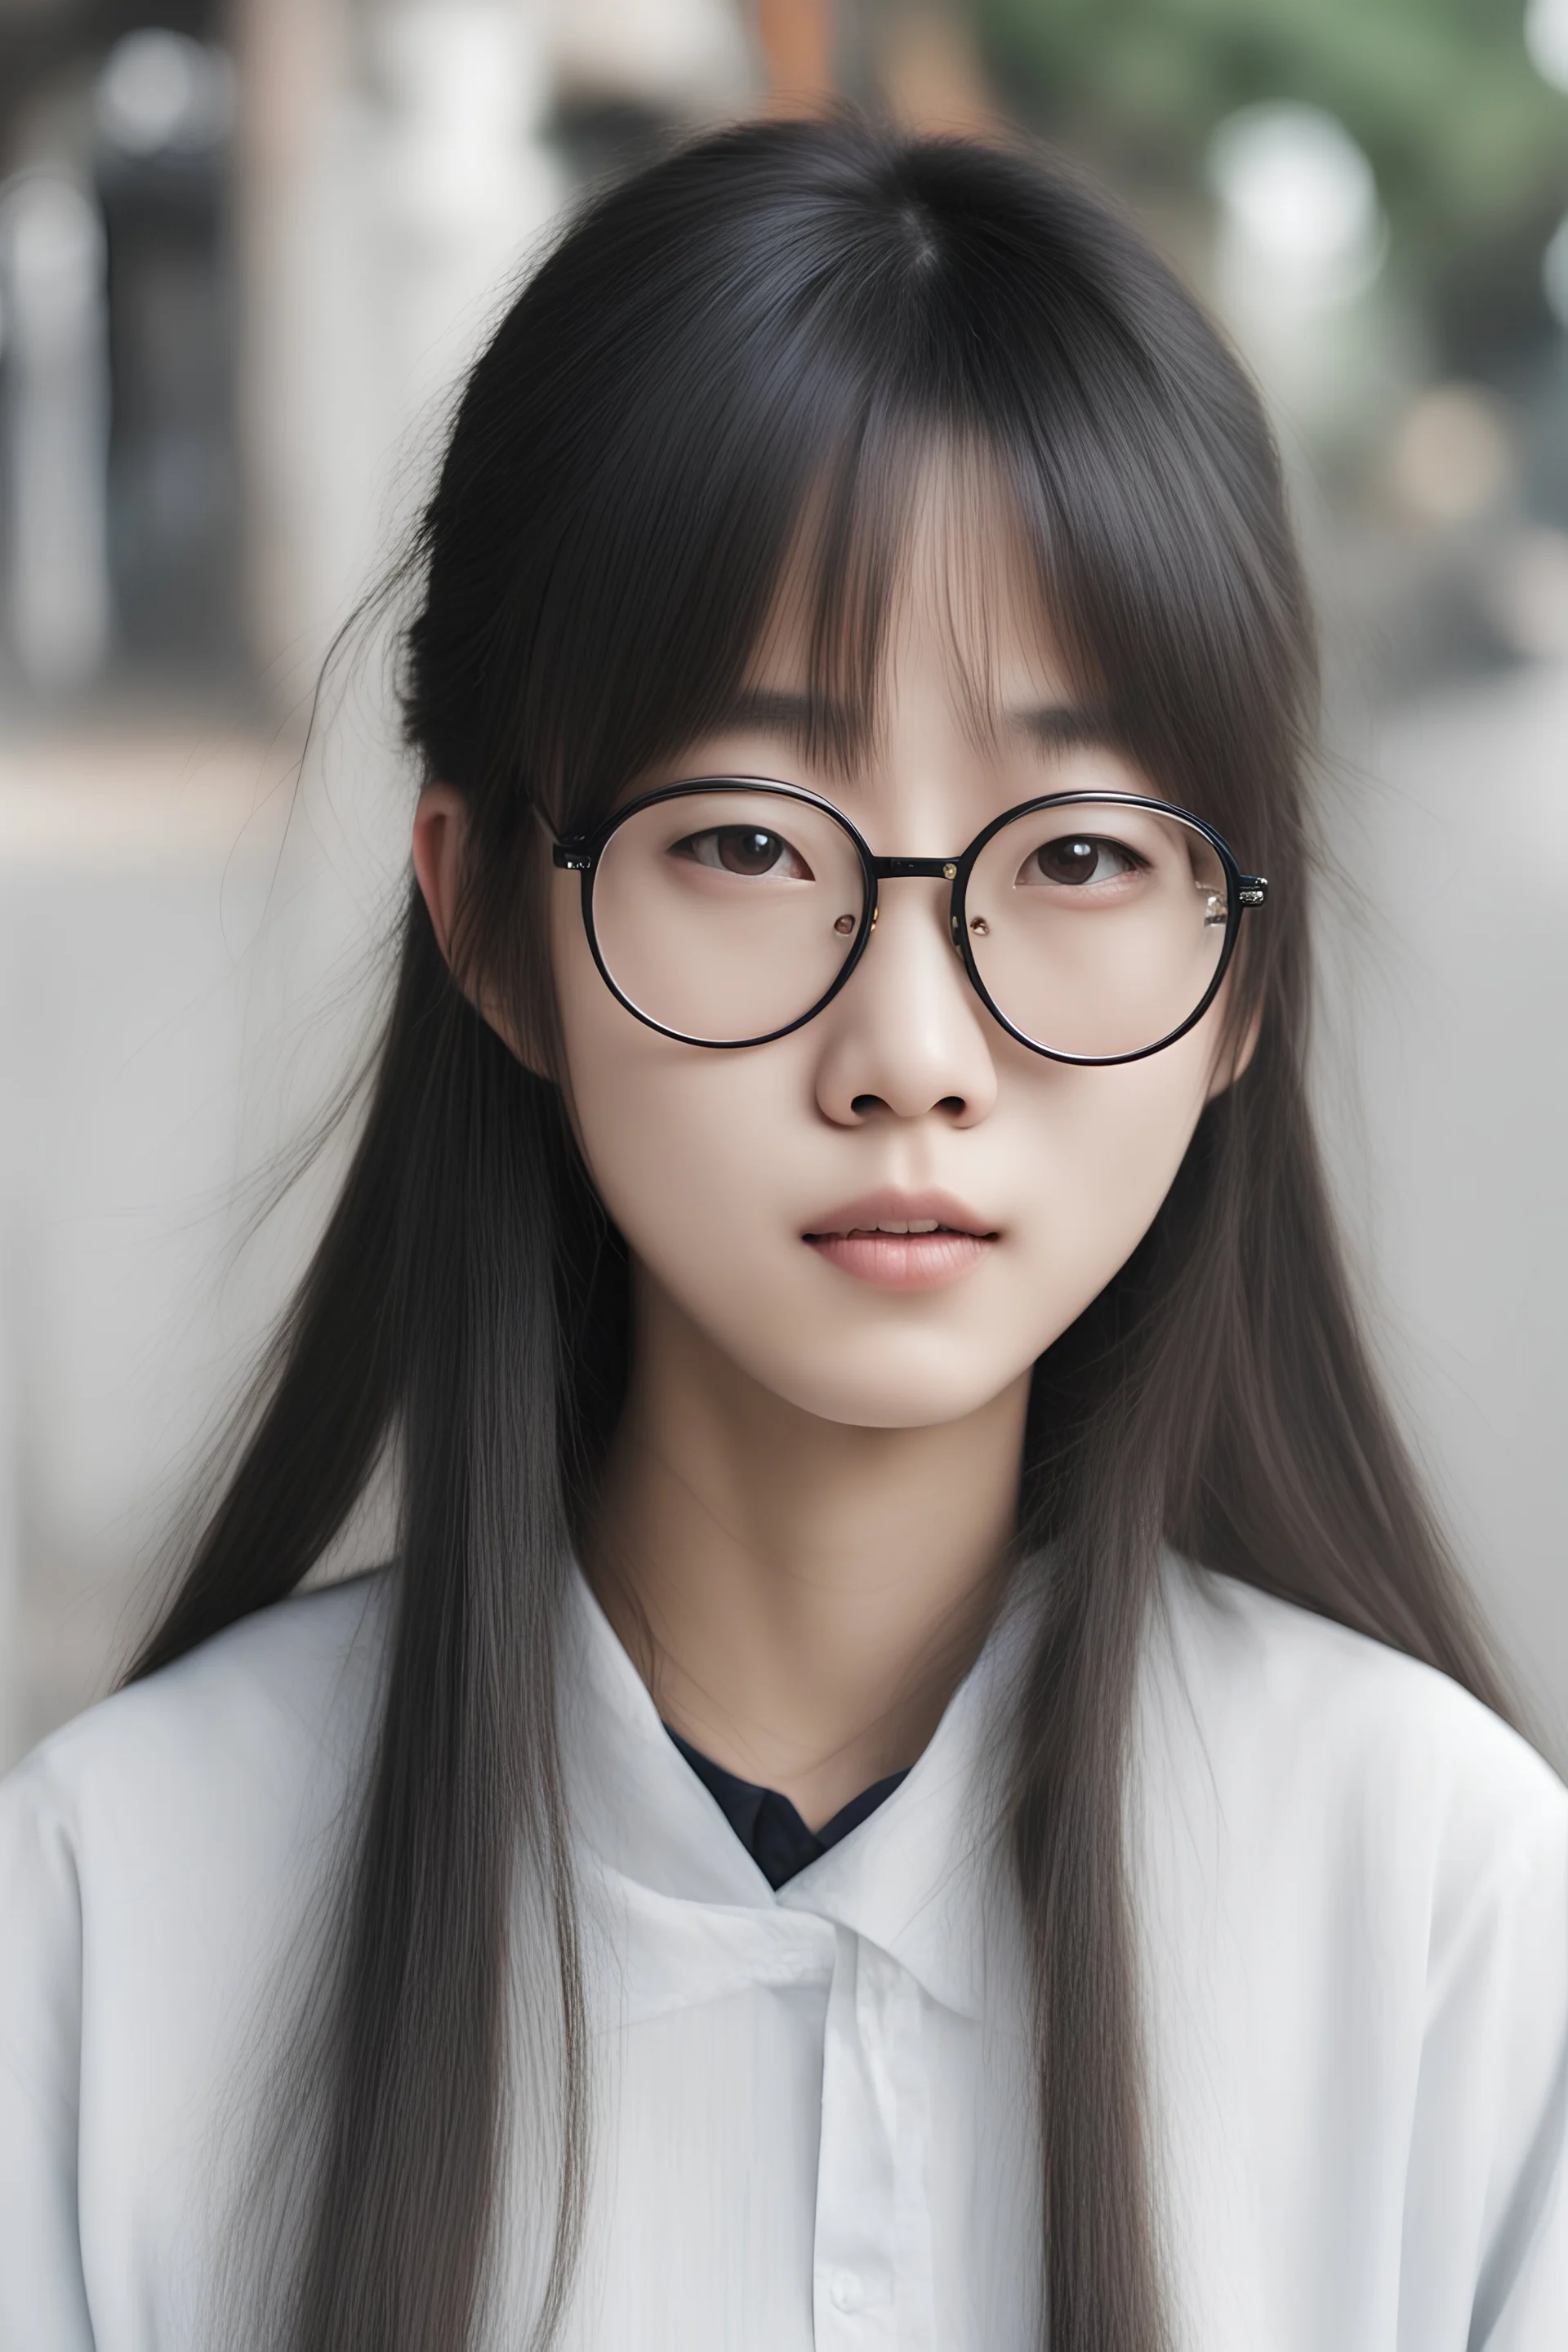 15 years old chinese girl with glasses long hair with bangs